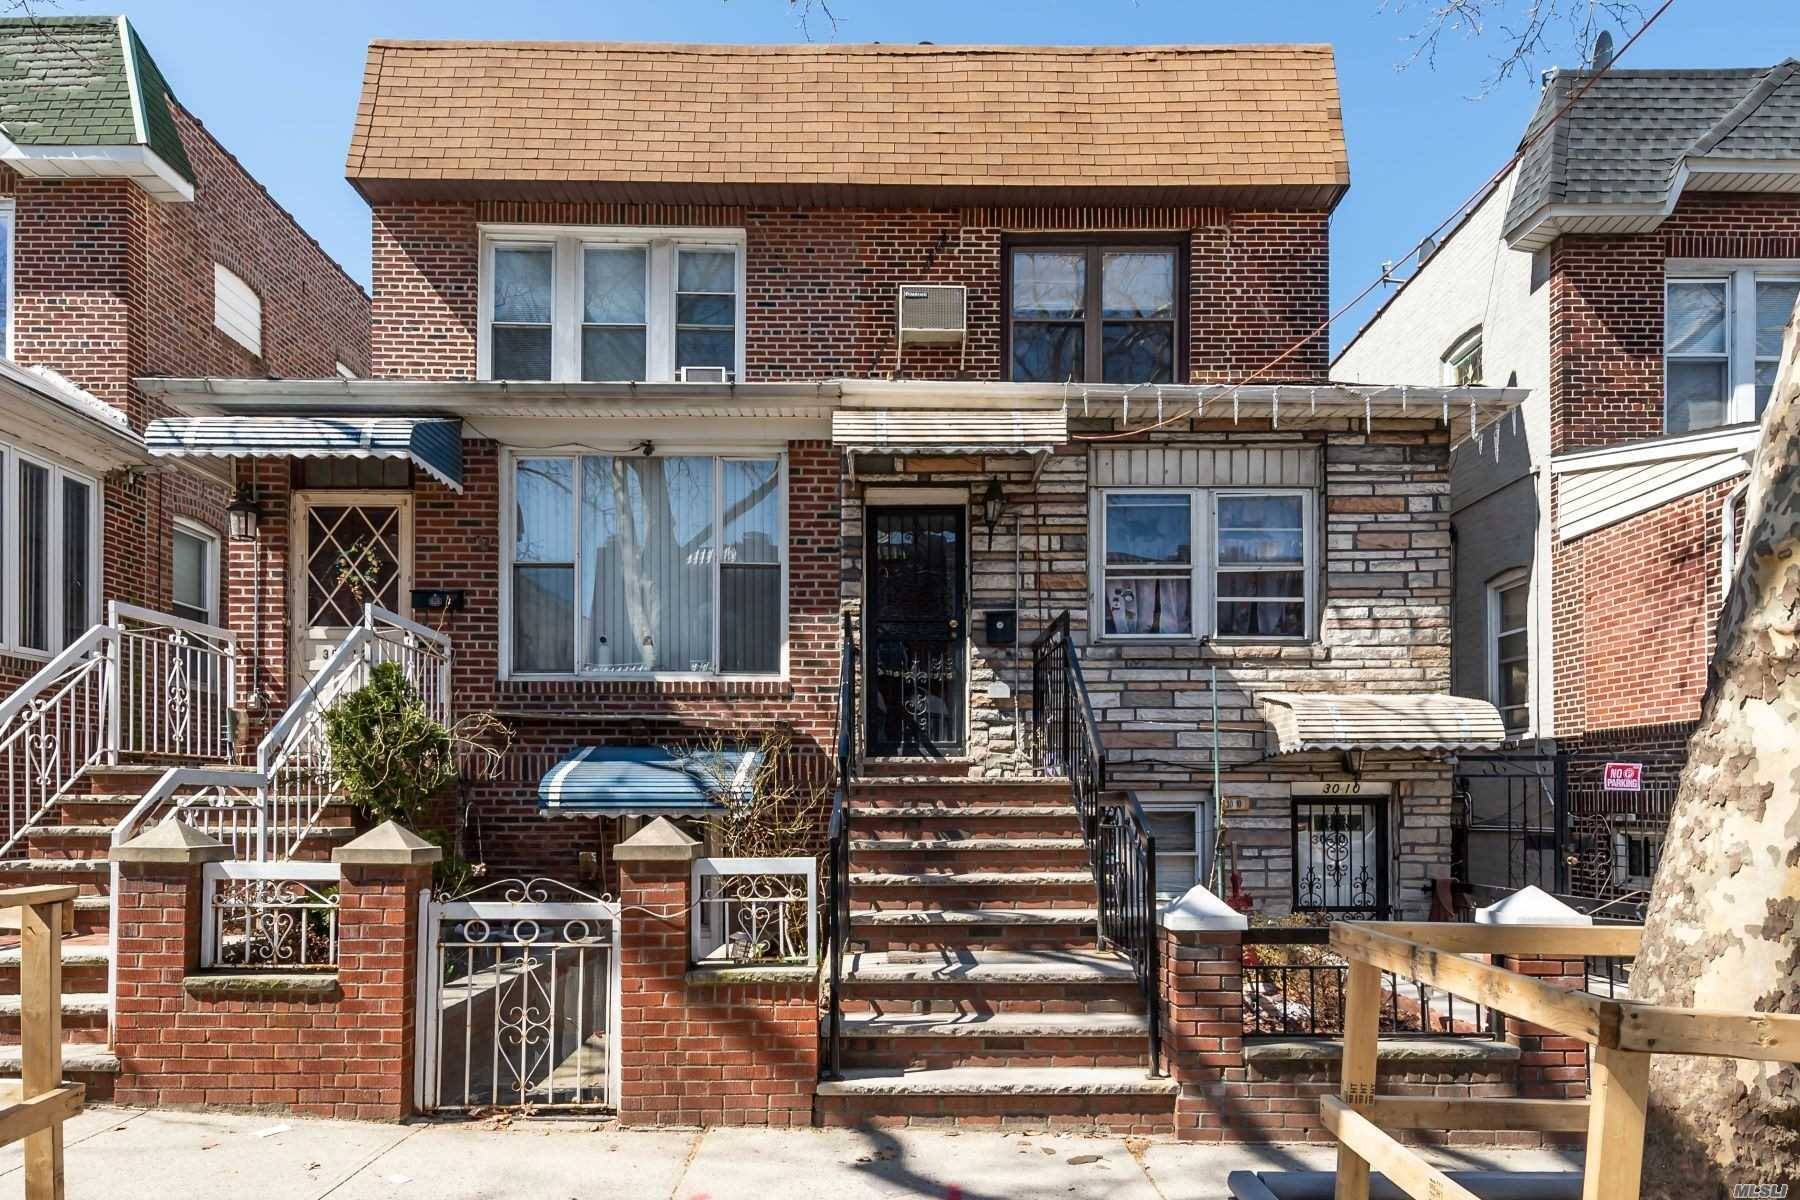 Larger than it seems, this 4 family home has a lower level 2 bedroom apartment with its own separate entrace, two 1 bedroom apartments on the first level, one of ...